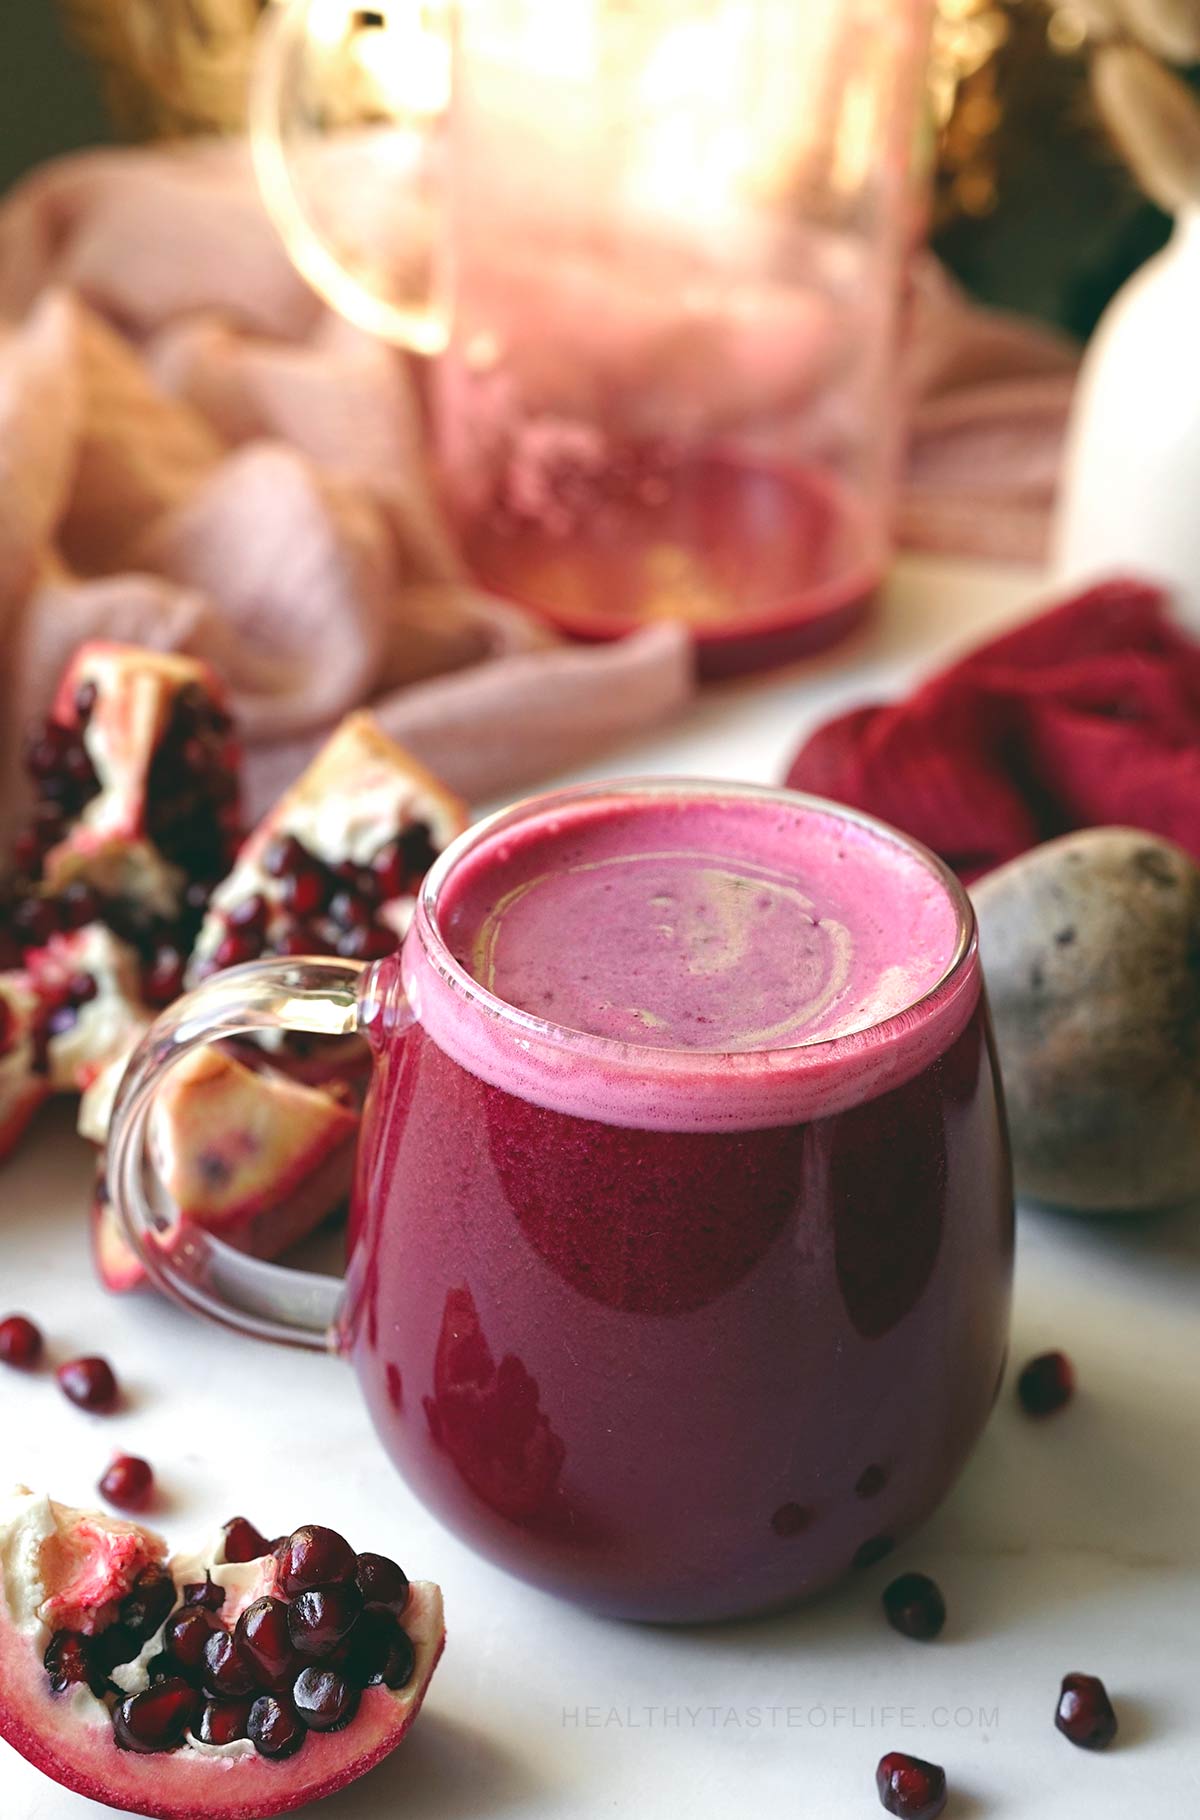 Beet and pomegranate juice in a glass mug.